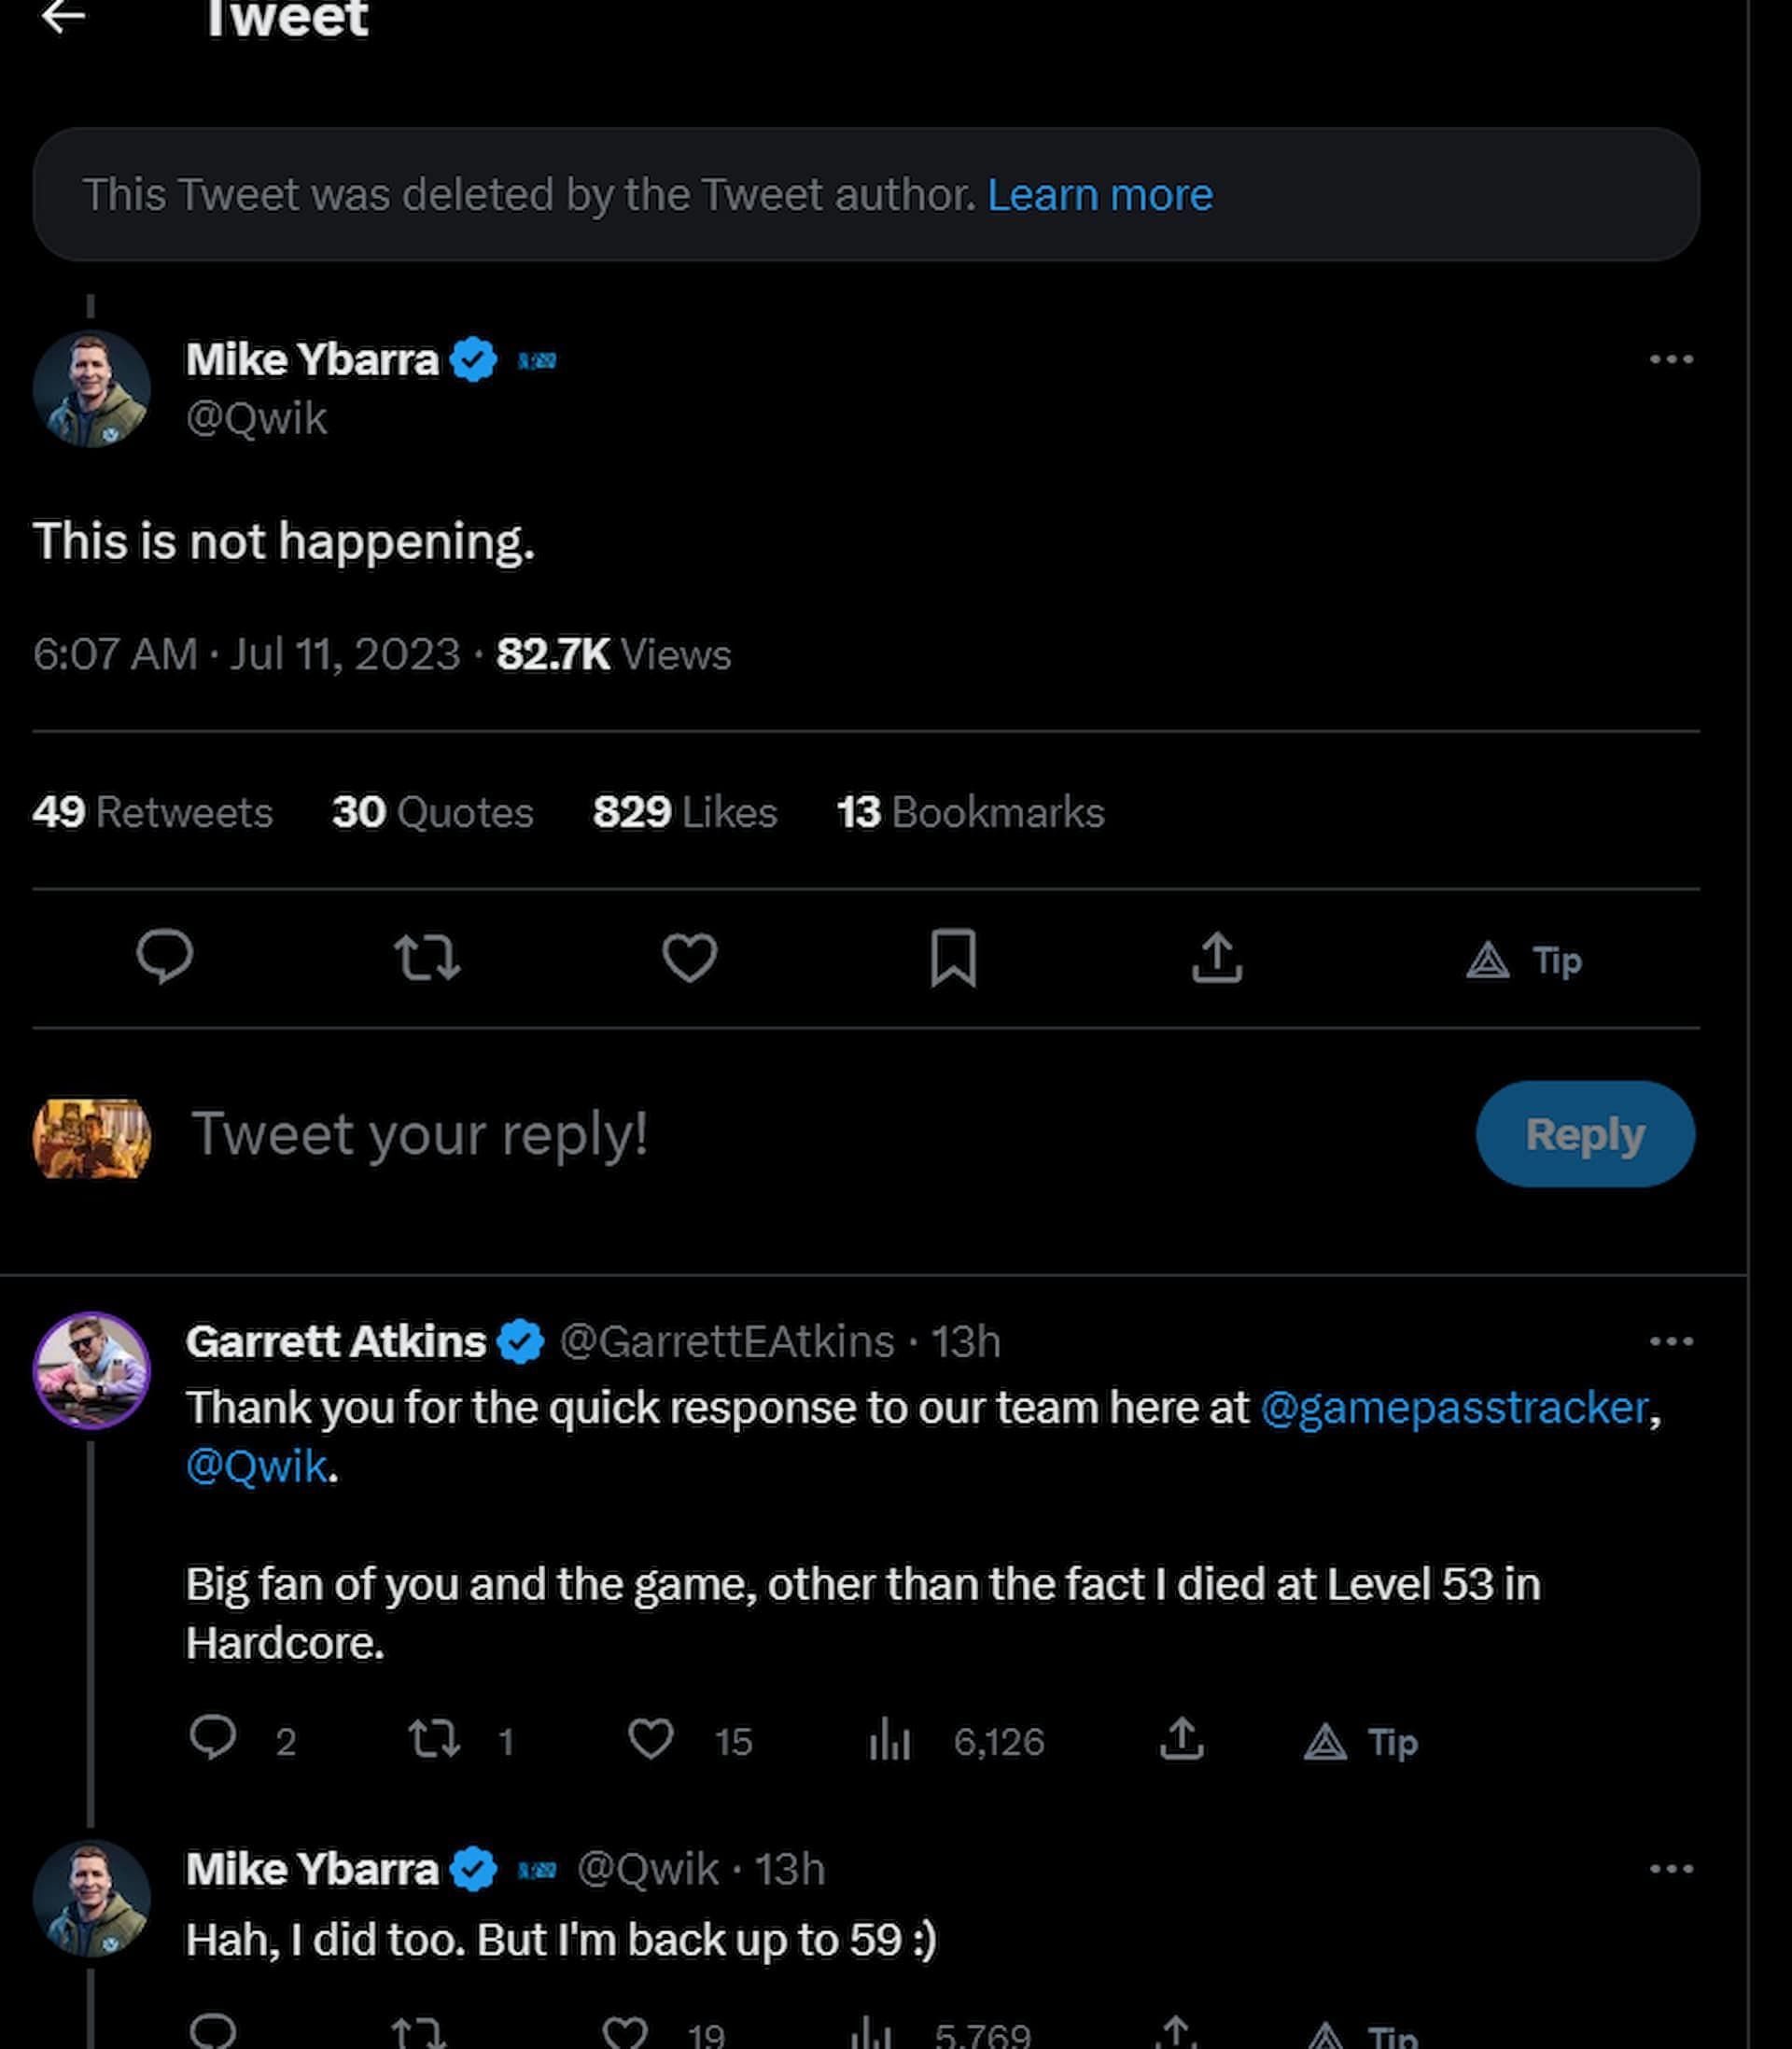 Mike Ybarra responded to a tweet that mentioned Diablo 4 will be coming to Game Pass. The parent tweet has been deleted (Screenshot by Sportskeeda)